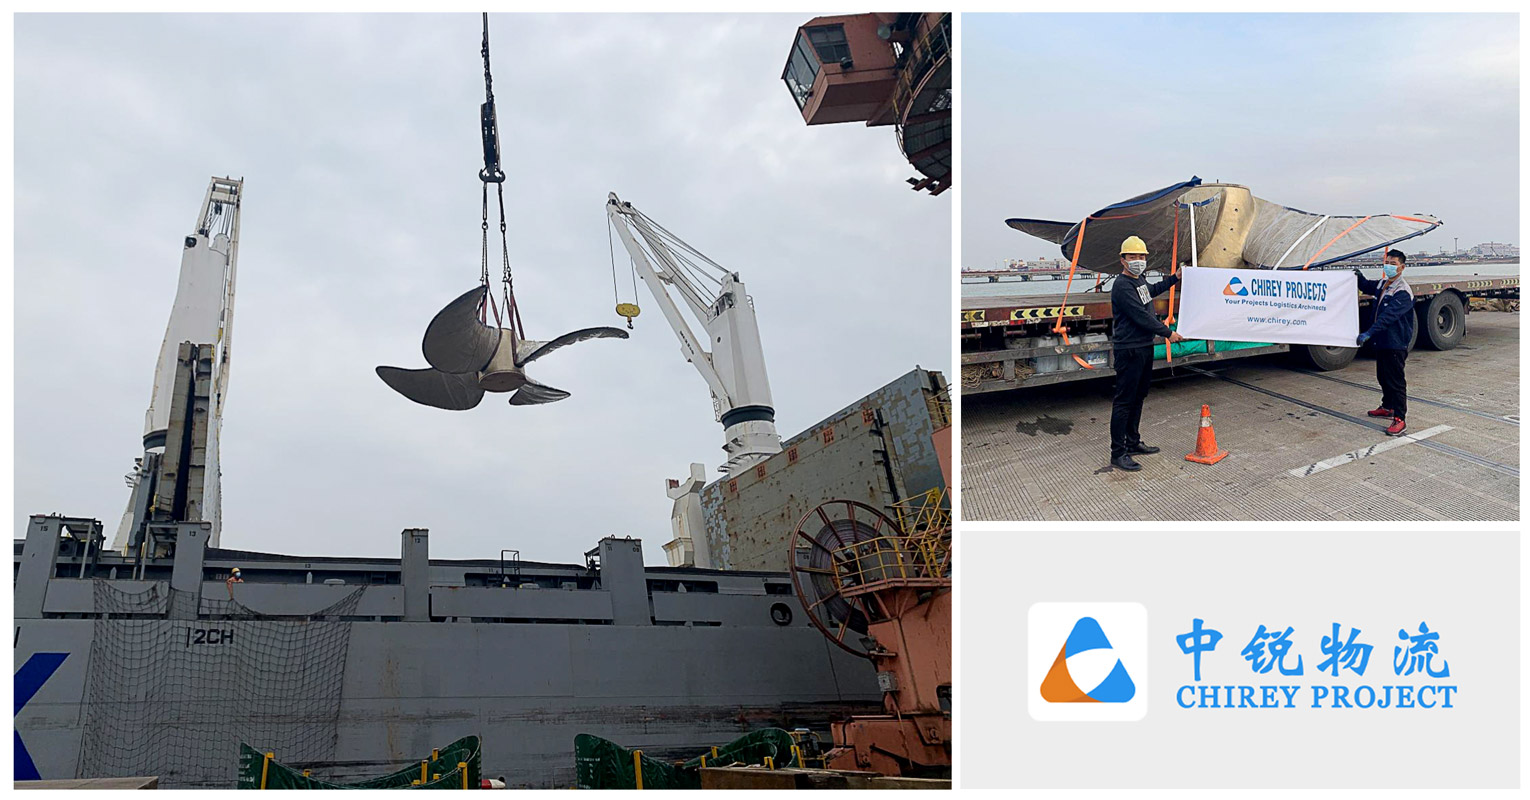 Chirey Projects Recently Transported a Propeller from a Chinese Factory